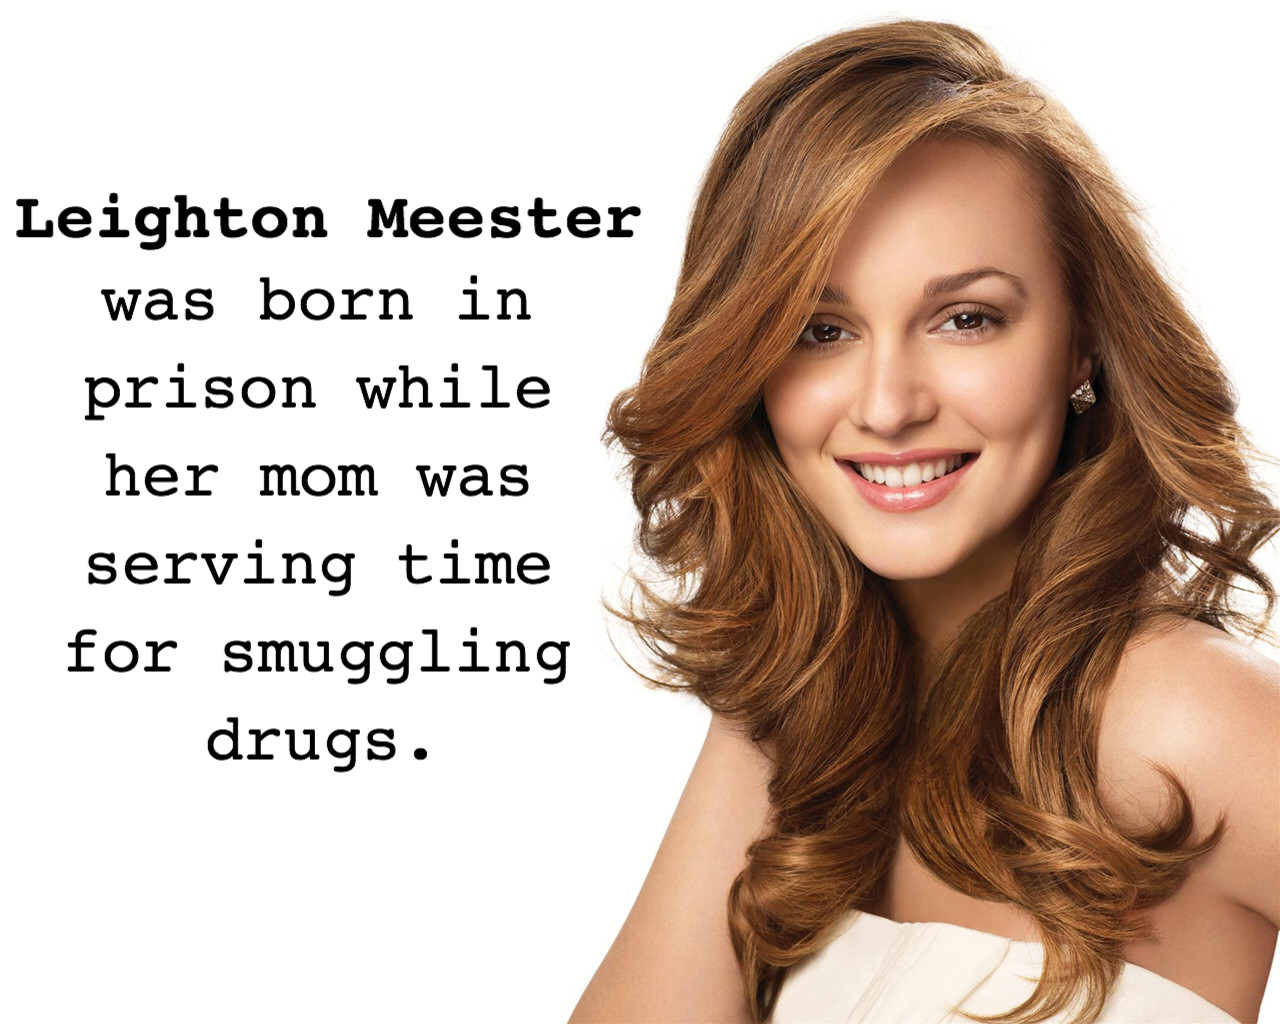 smile leighton meester hd - Leighton Meester was born in prison while her mom was serving time for smuggling drugs.